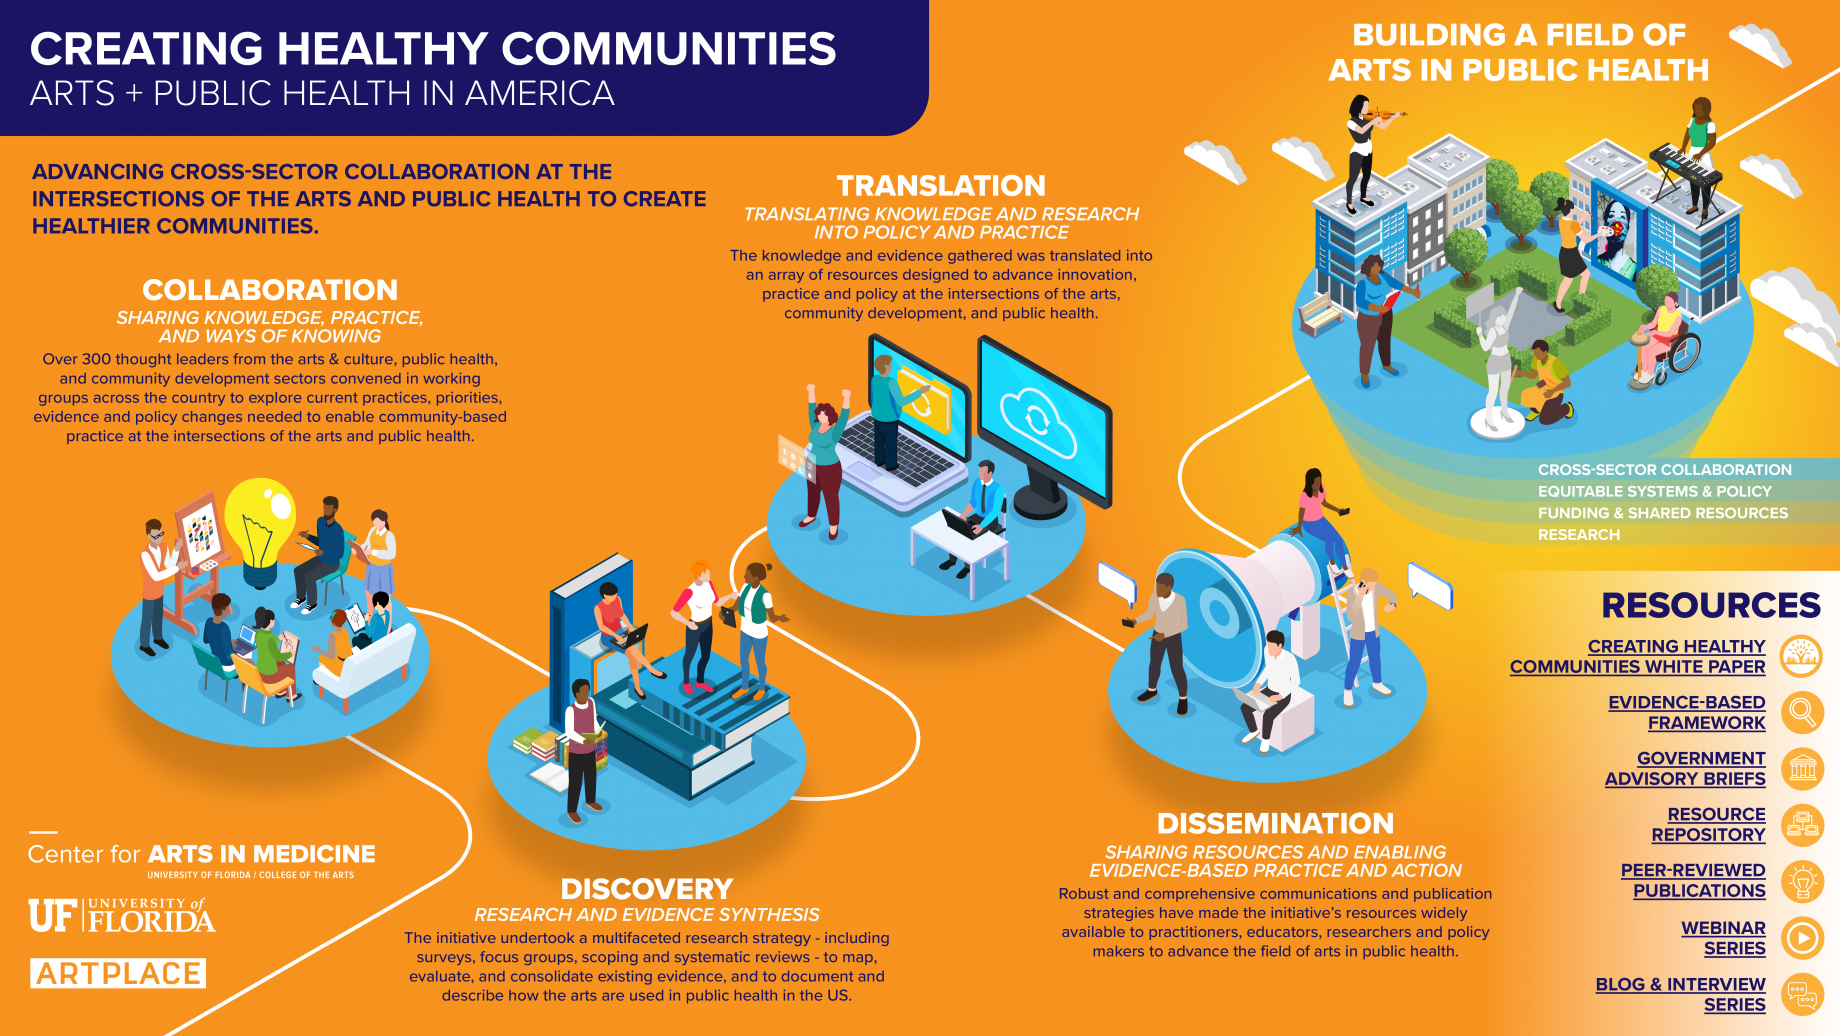 Creating Healthy Communities Initiative Overview Infographic